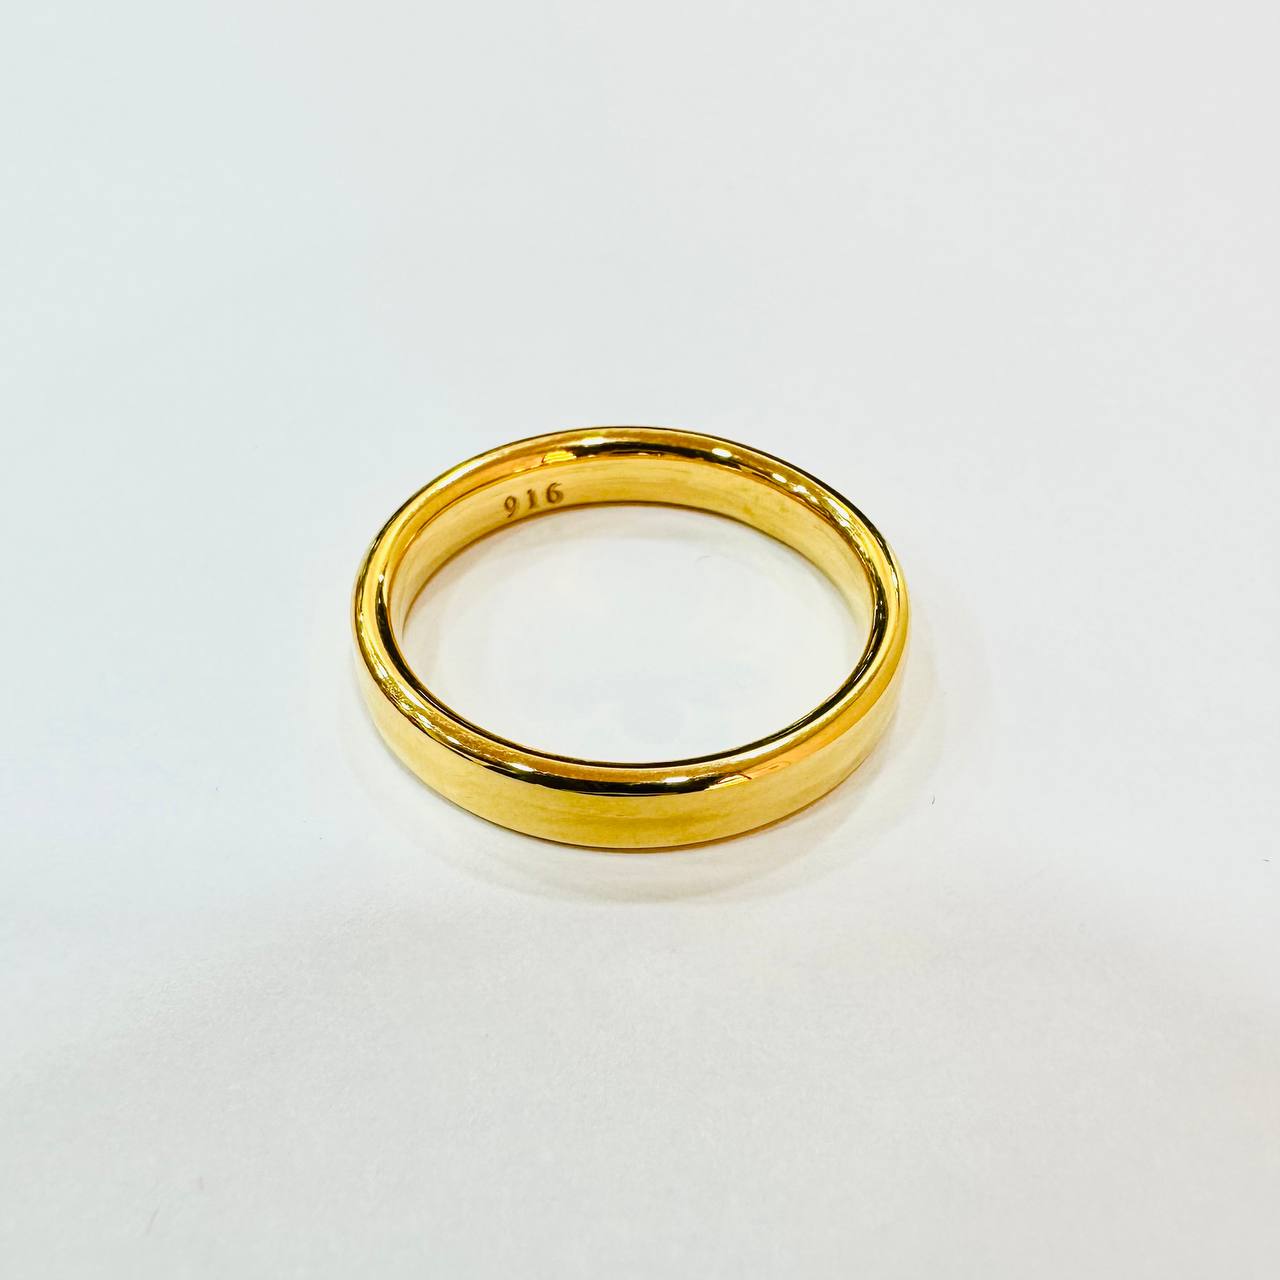 22k / 916 Gold Hollow Shiny Smooth Ring-916 gold-Best Gold Shop